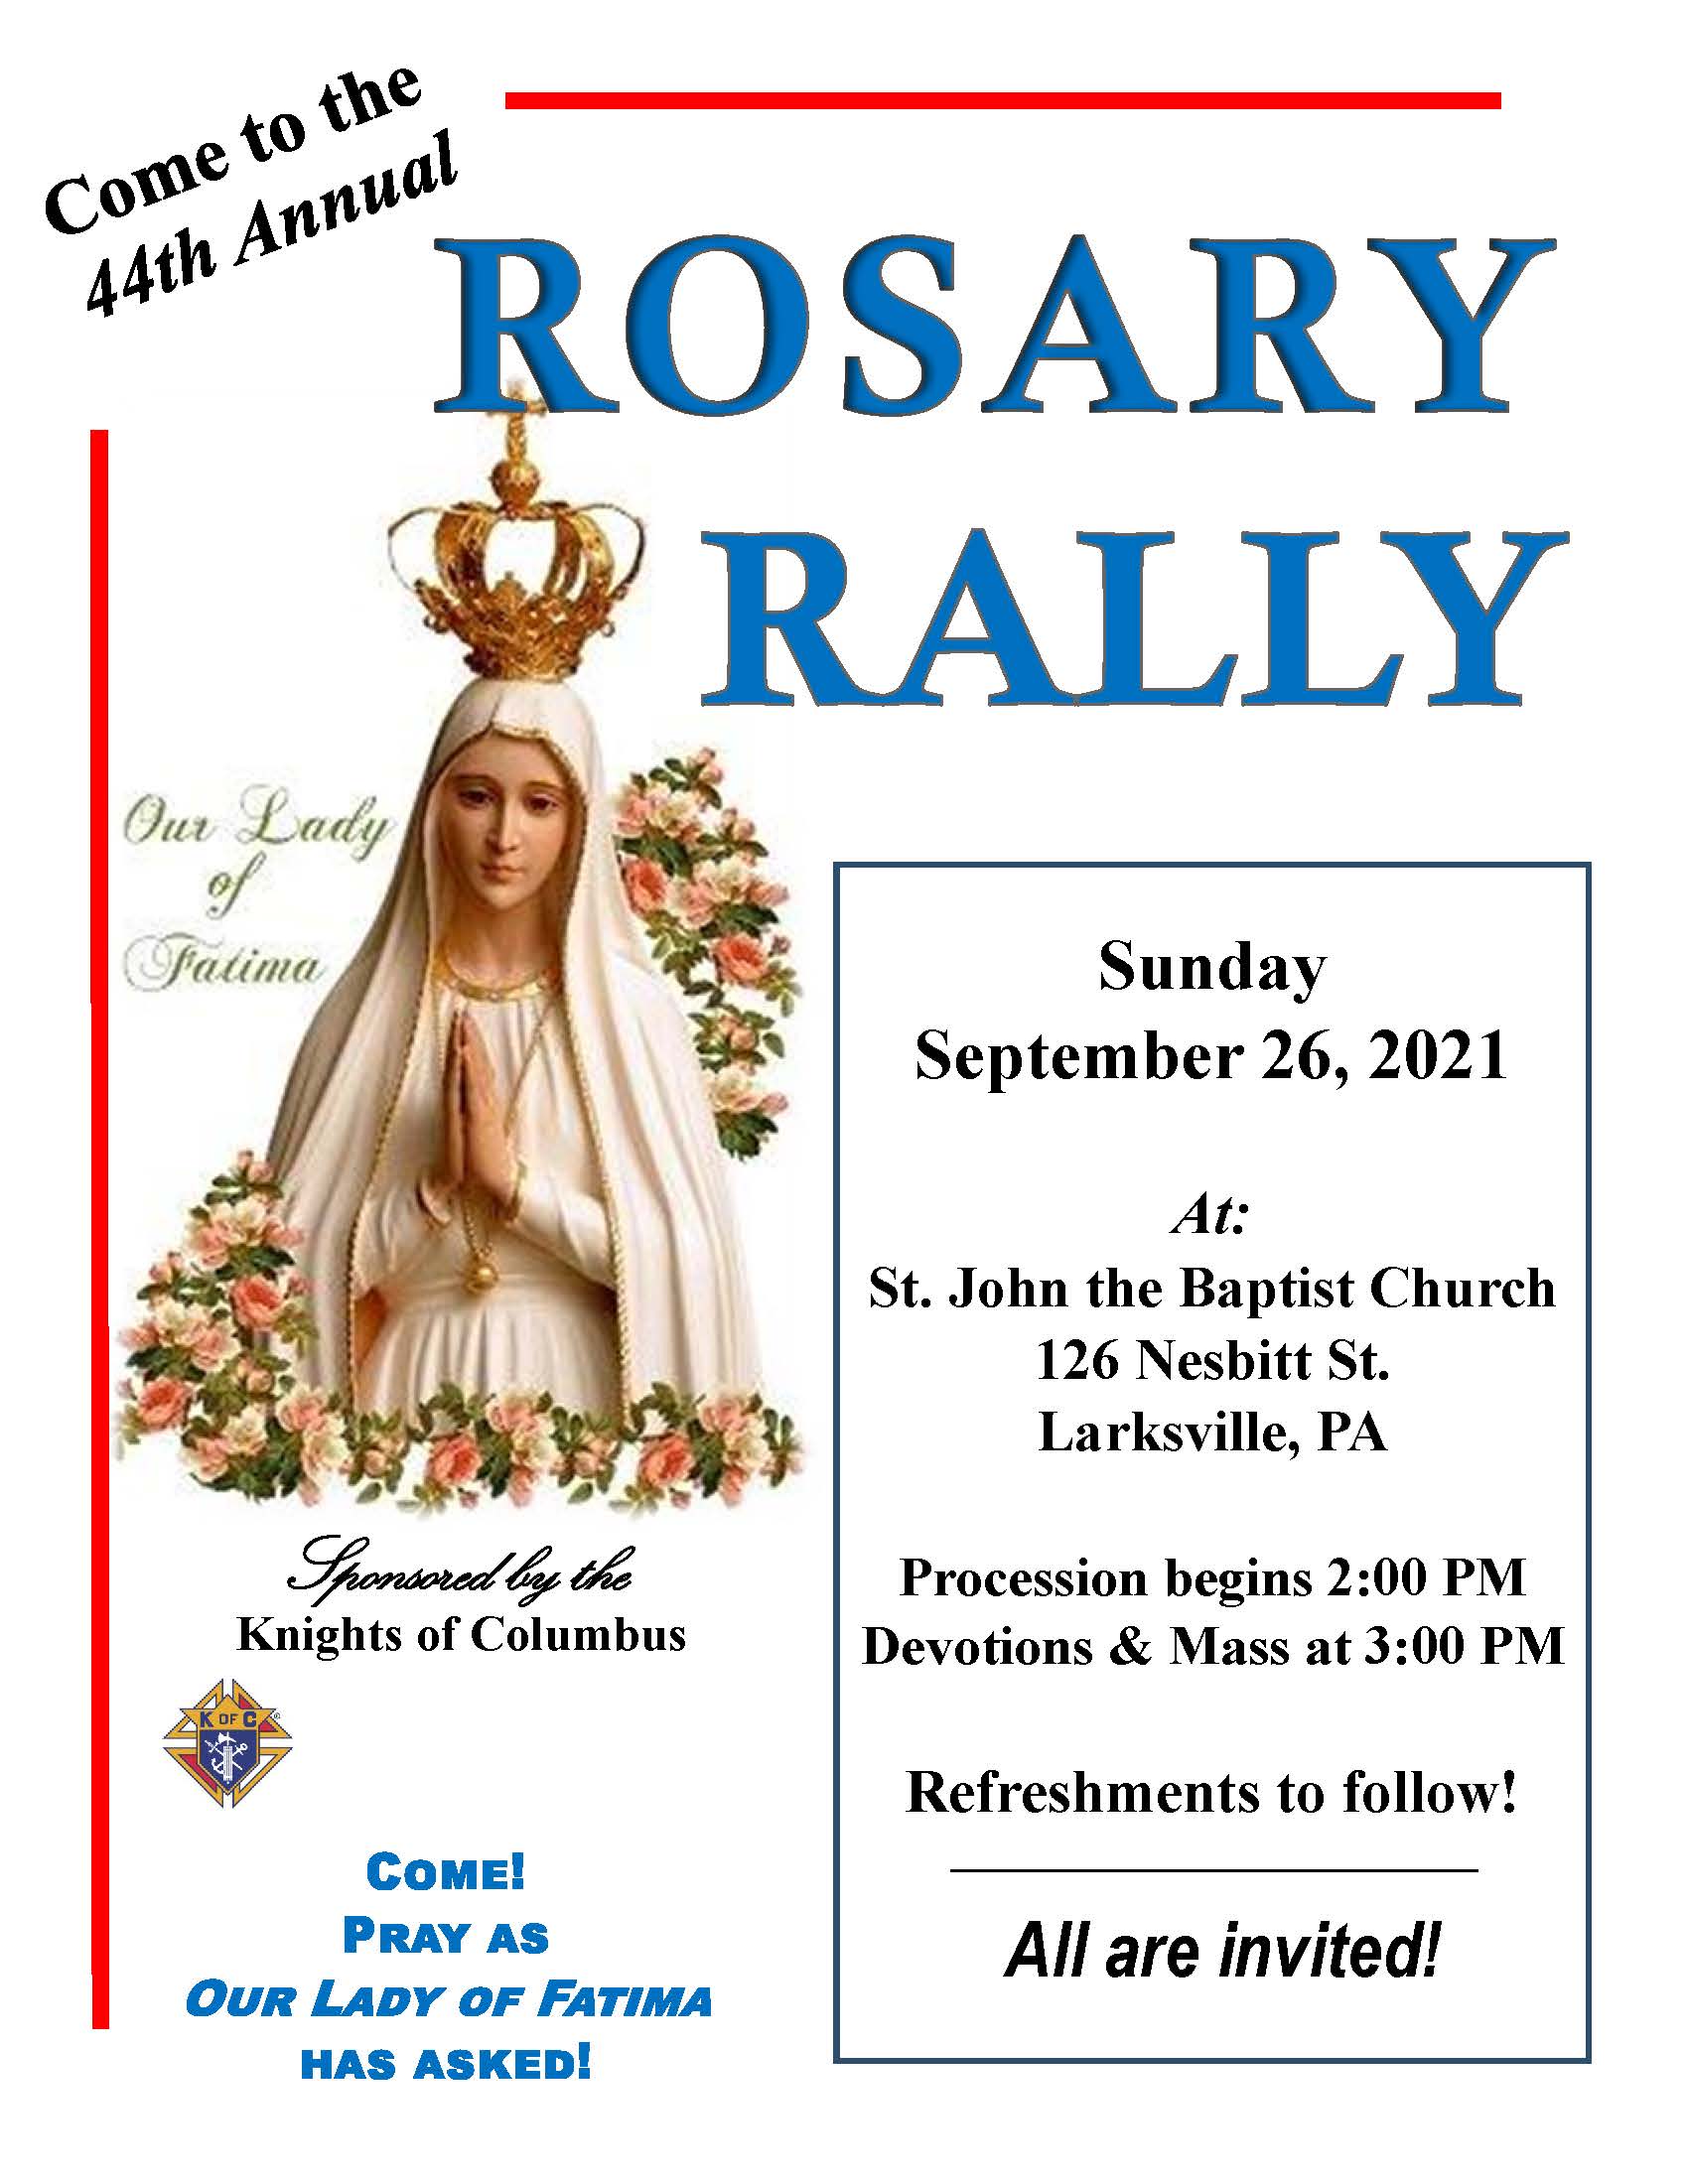 Rosary Rally Diocese of Scranton